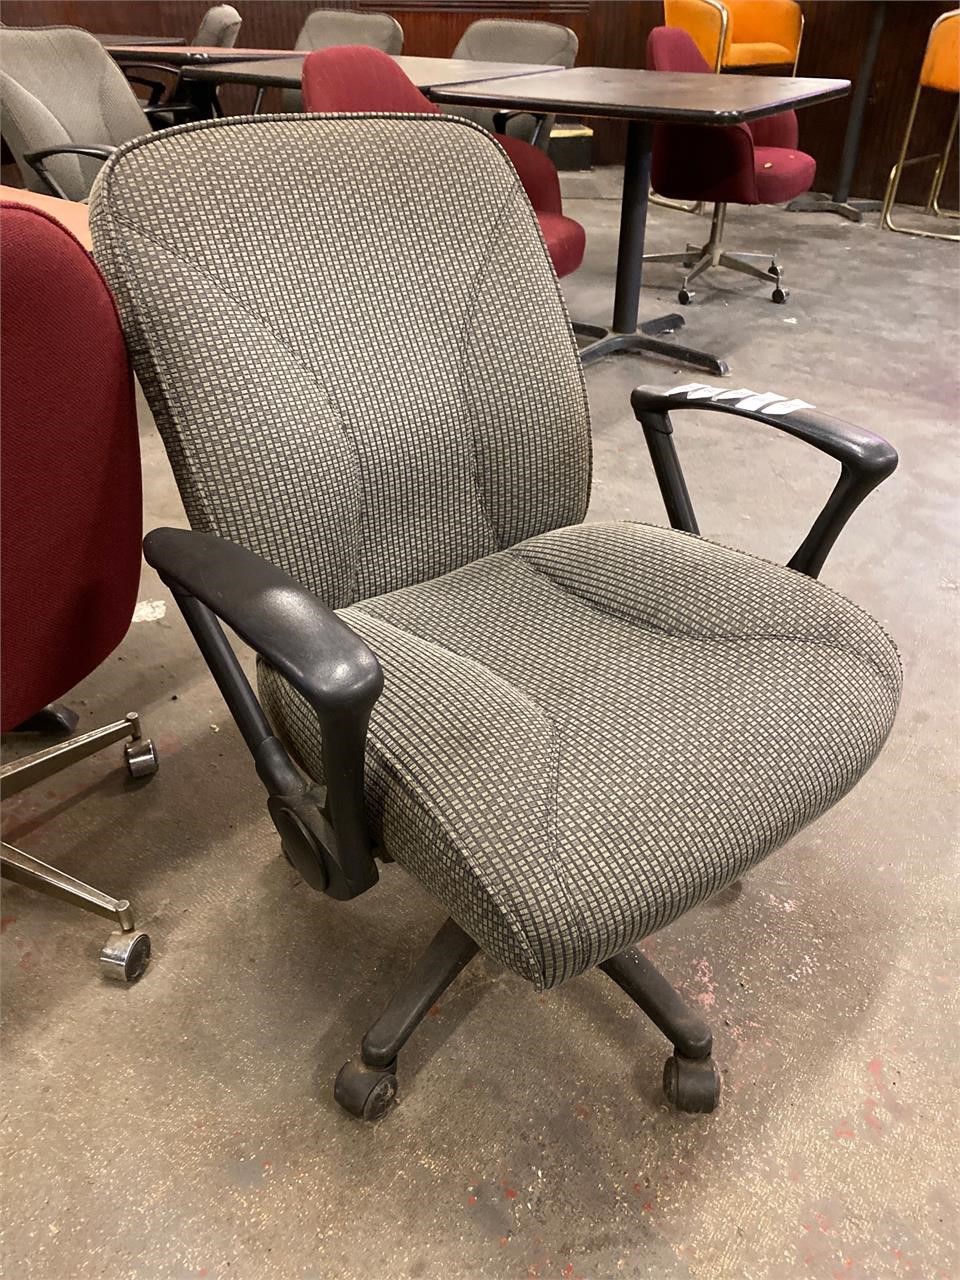 2x Adjustable Padded Chairs